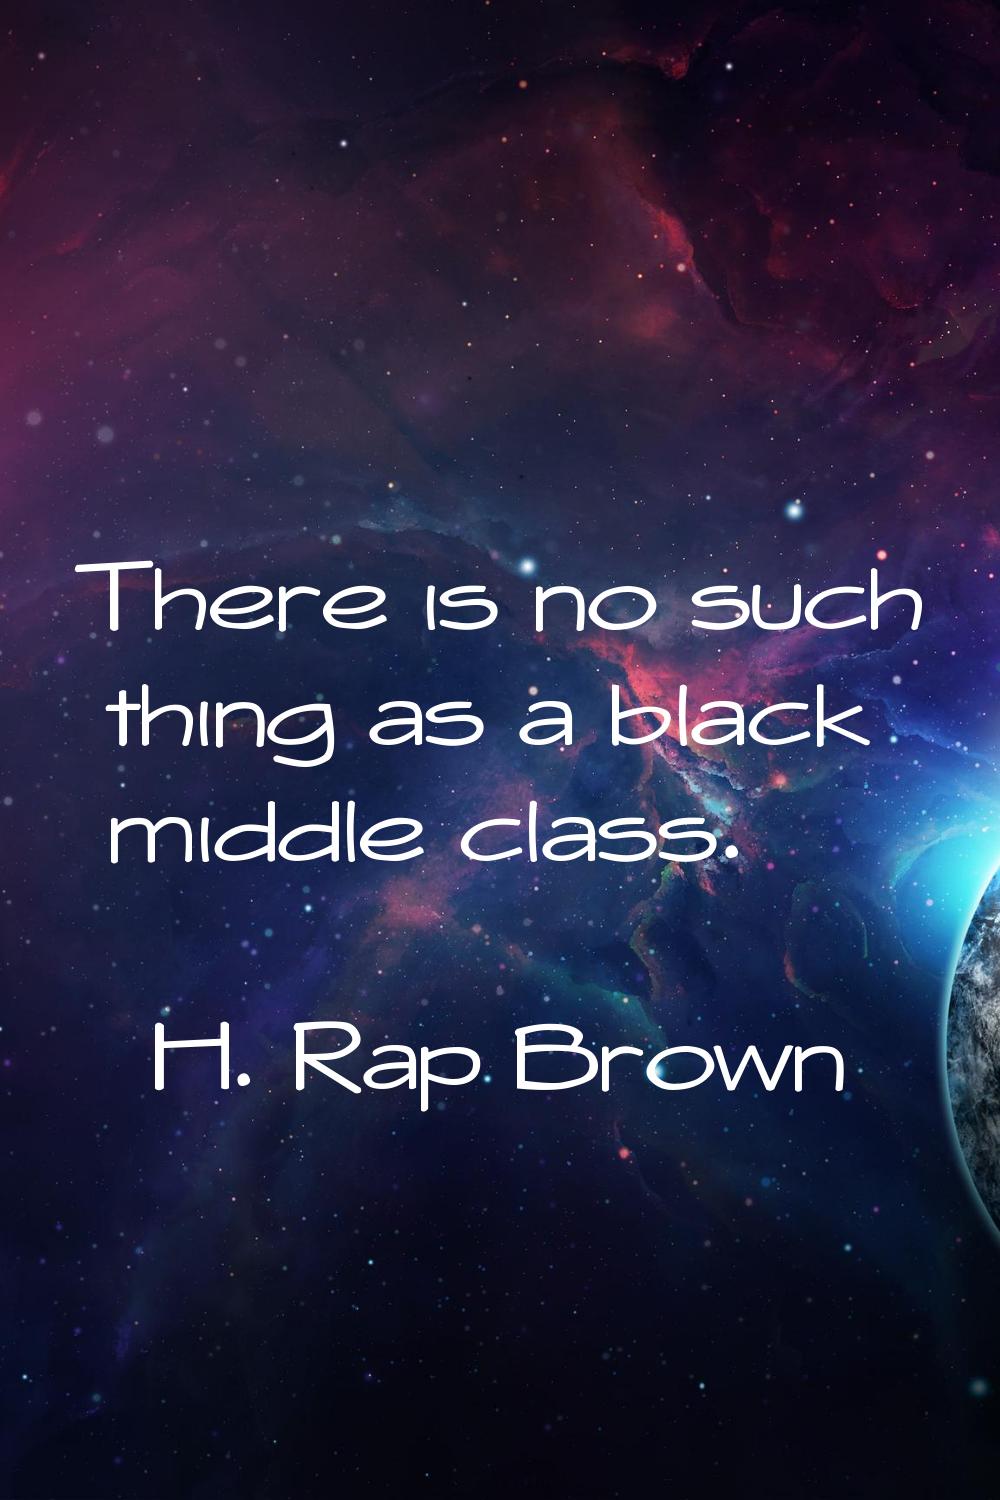 There is no such thing as a black middle class.